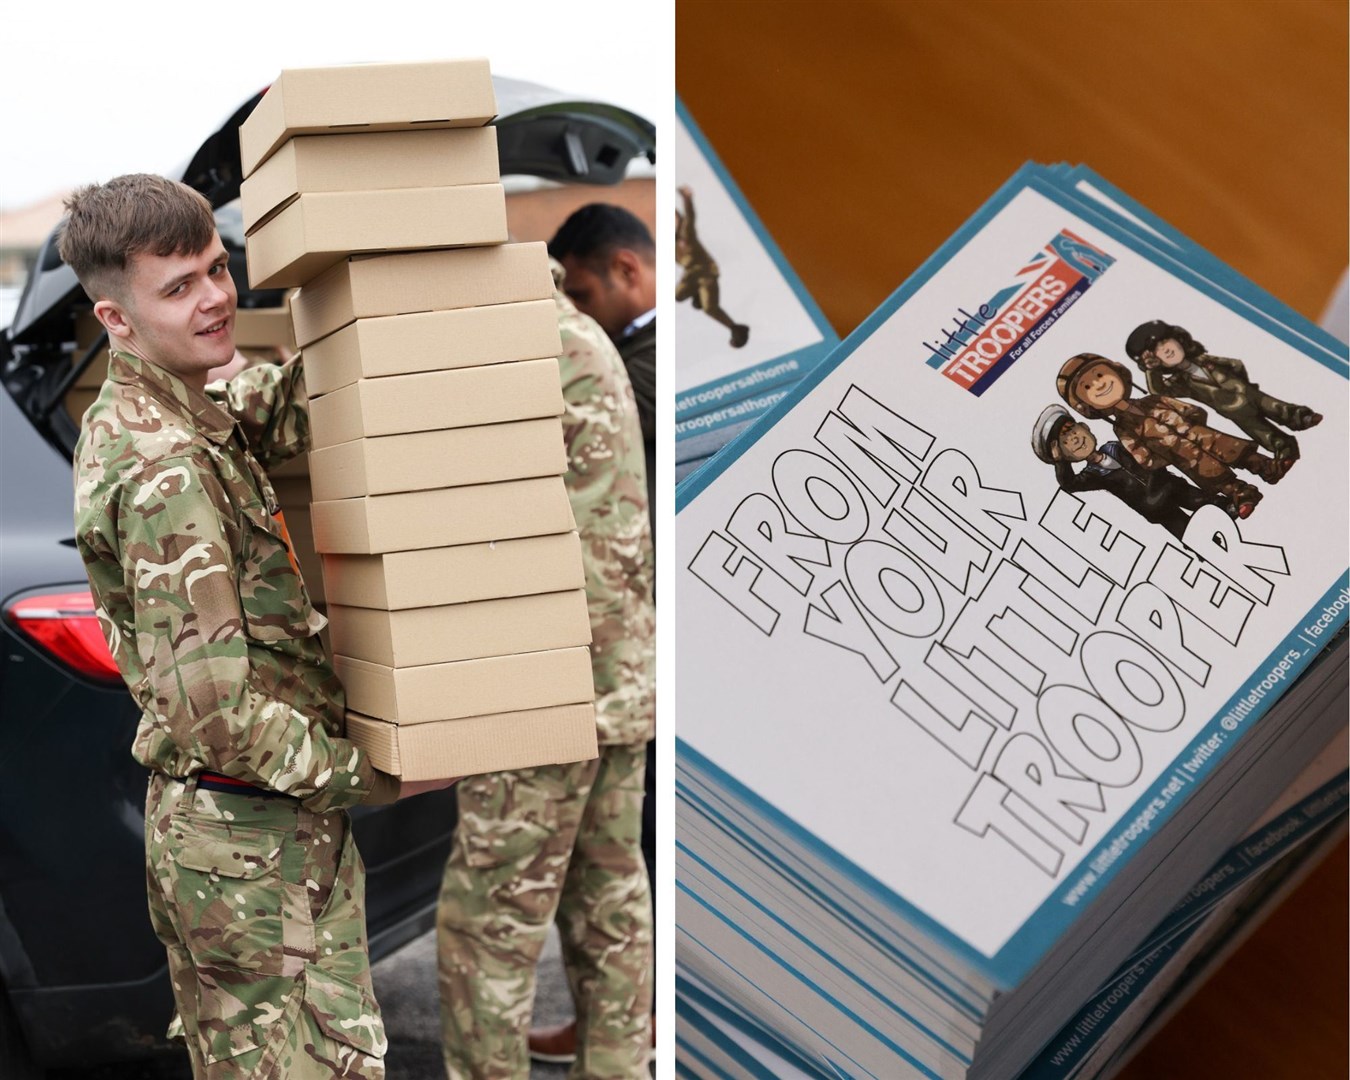 The charity, Little Troopers, has sent Christmas boxes to military children in Lossiemouth.